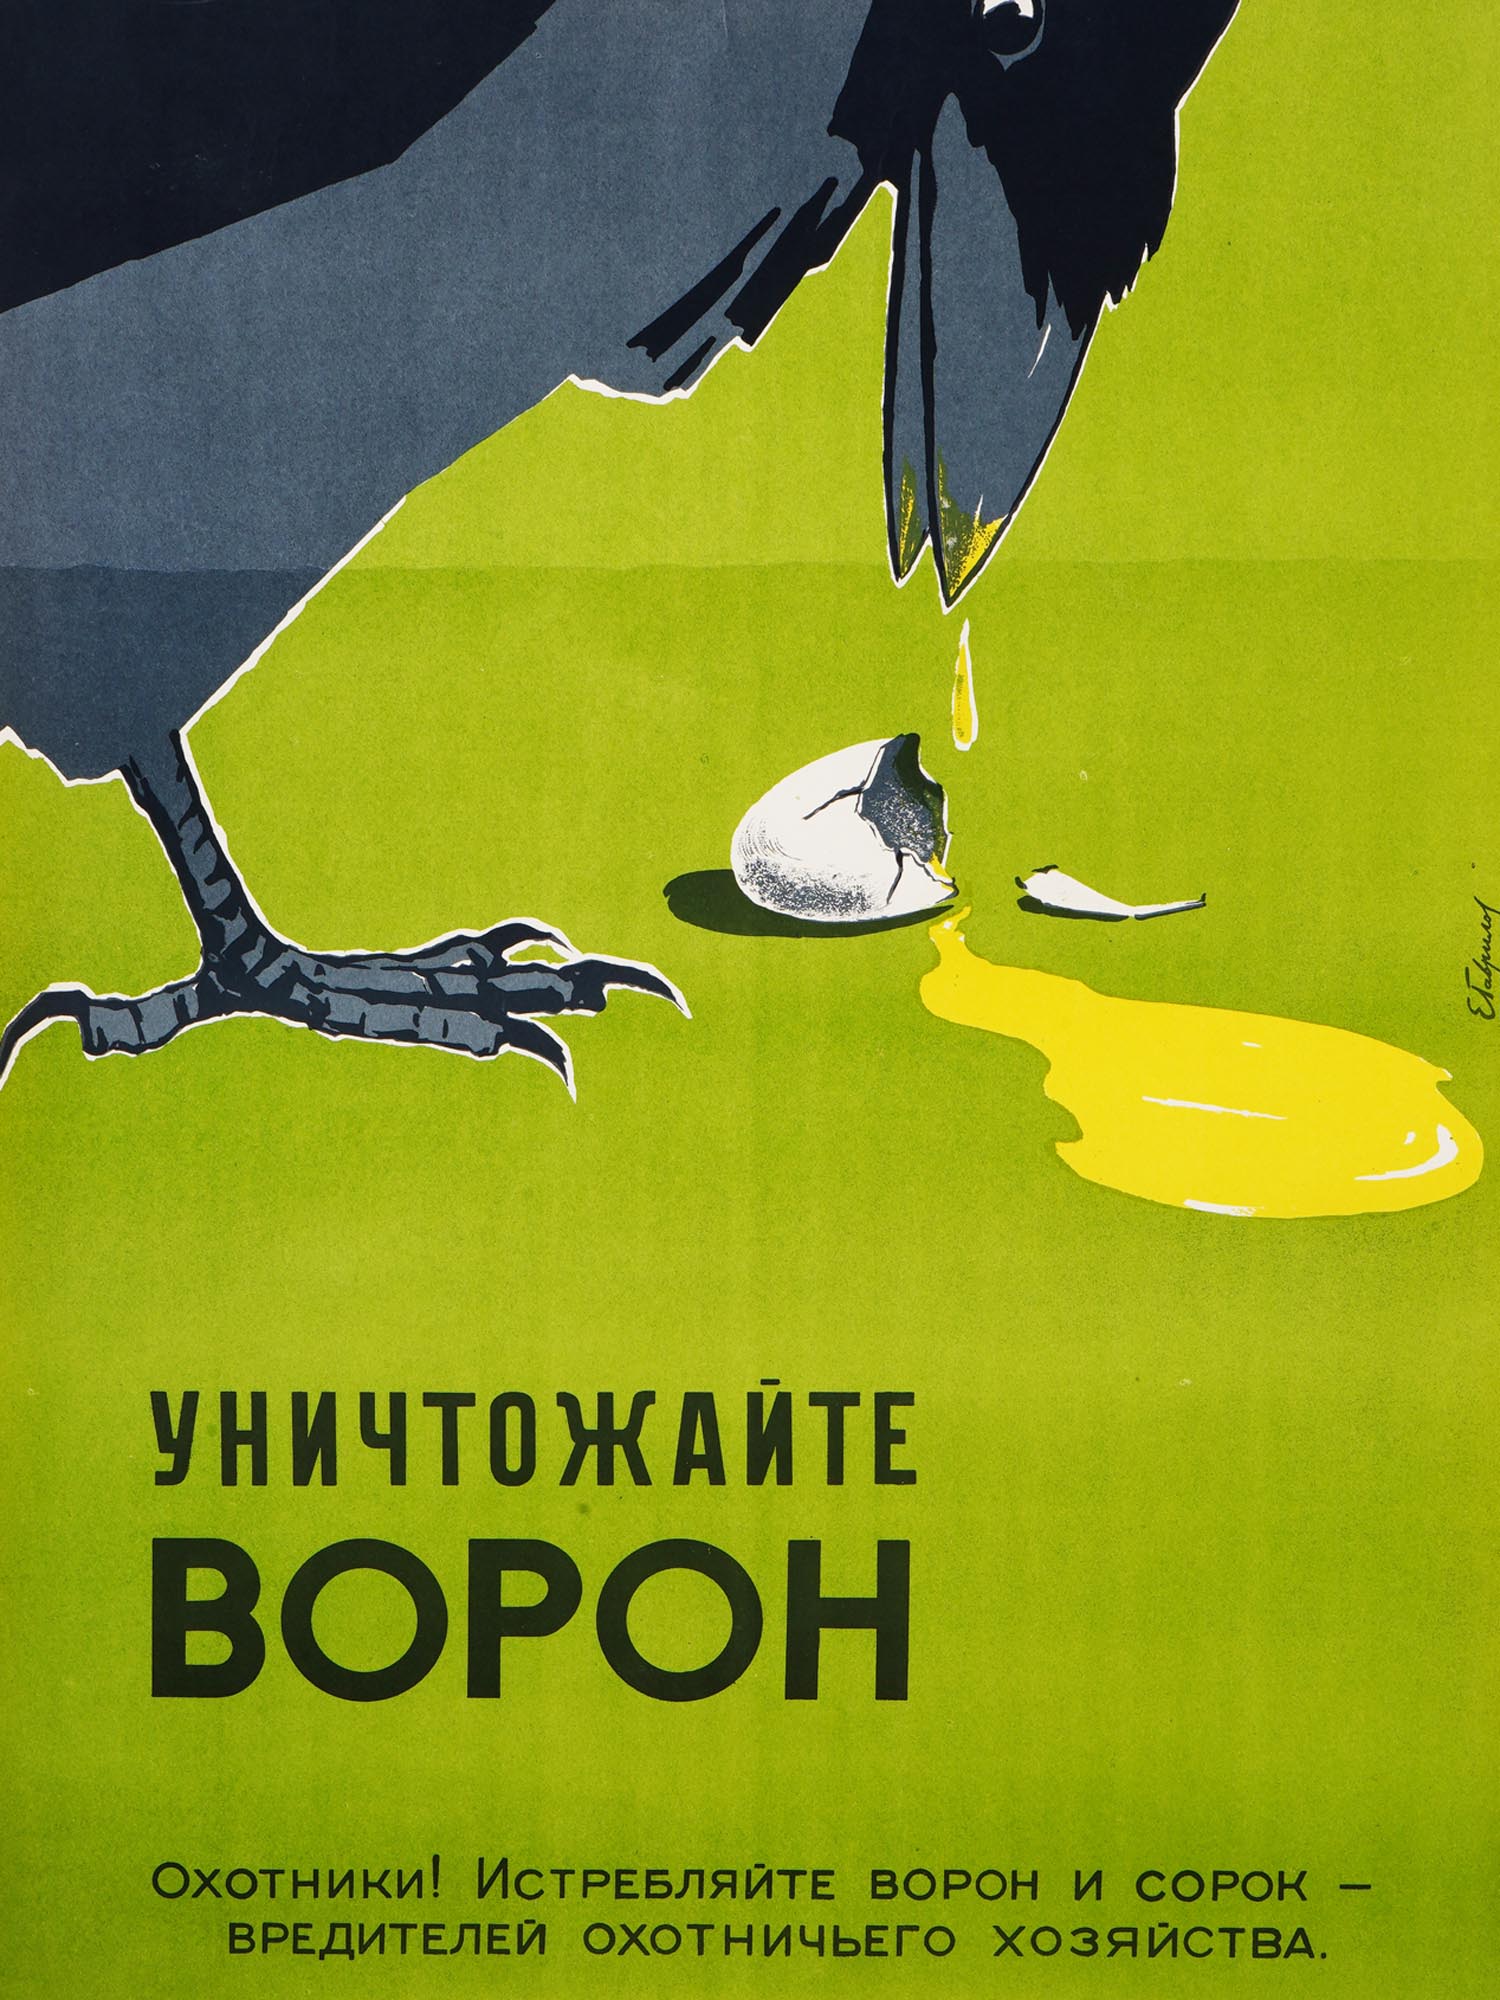 RUSSIAN SOVIET PROPAGANDA POSTER DESTROY THE CROWS PIC-1